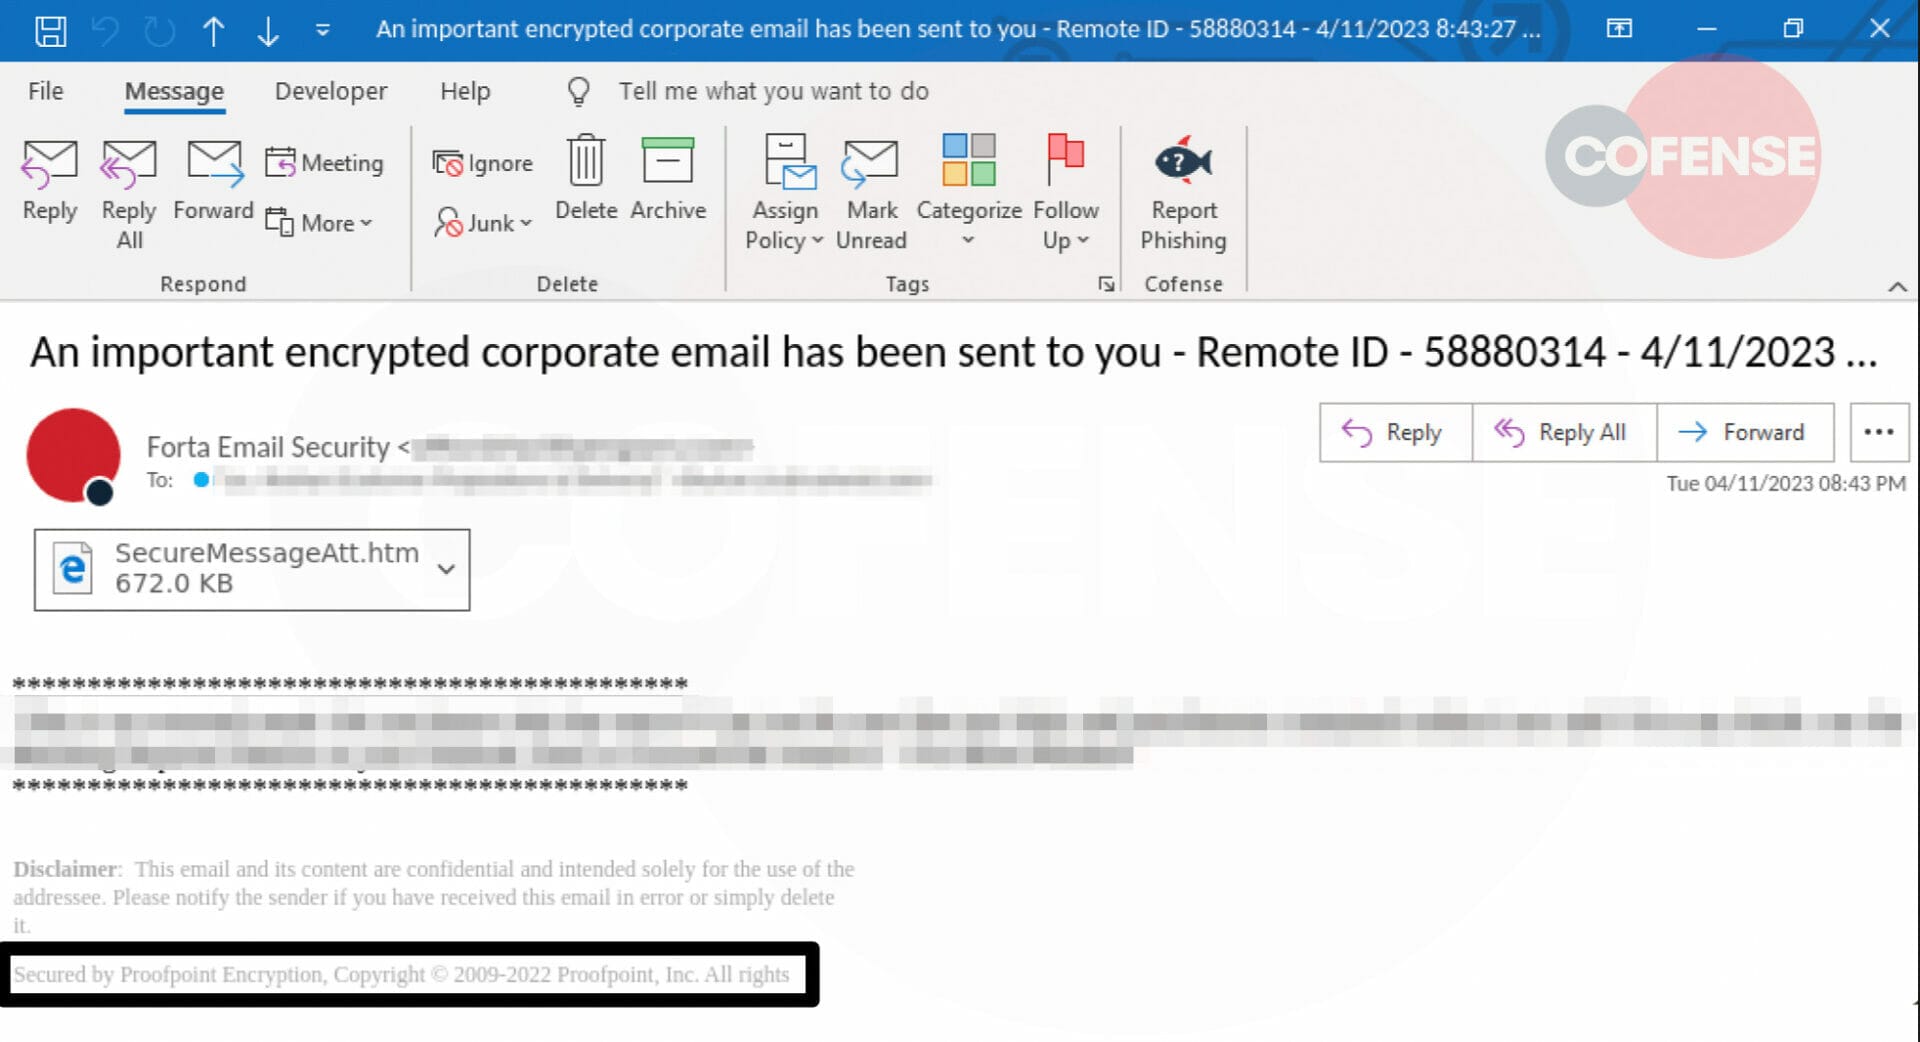 Threat Actors Impersonate Email Security Providers to Steal User Credentials